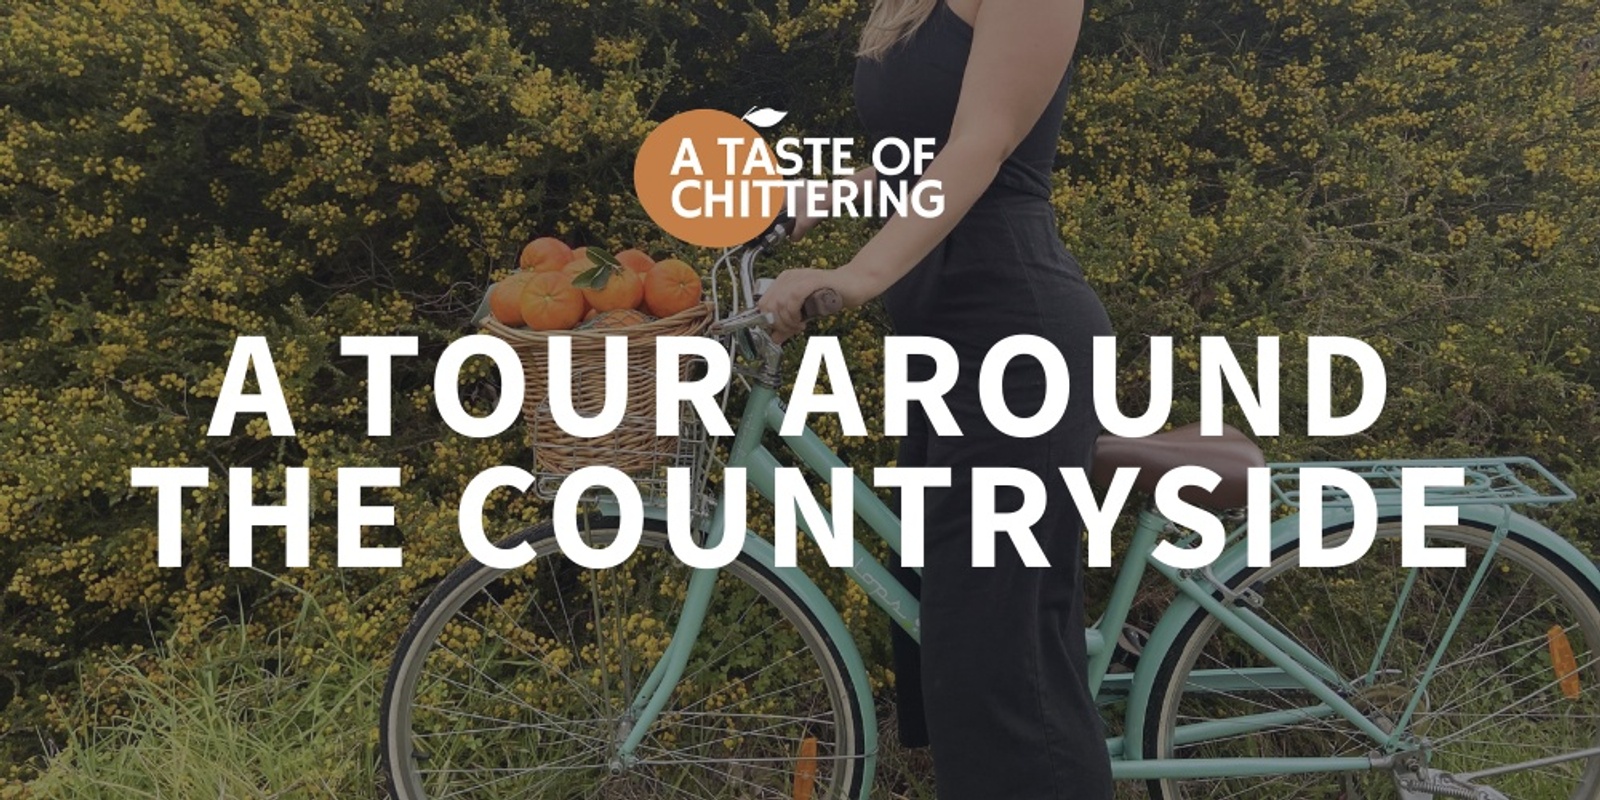 Banner image for A Tour Around The Countryside | A Taste of Chittering